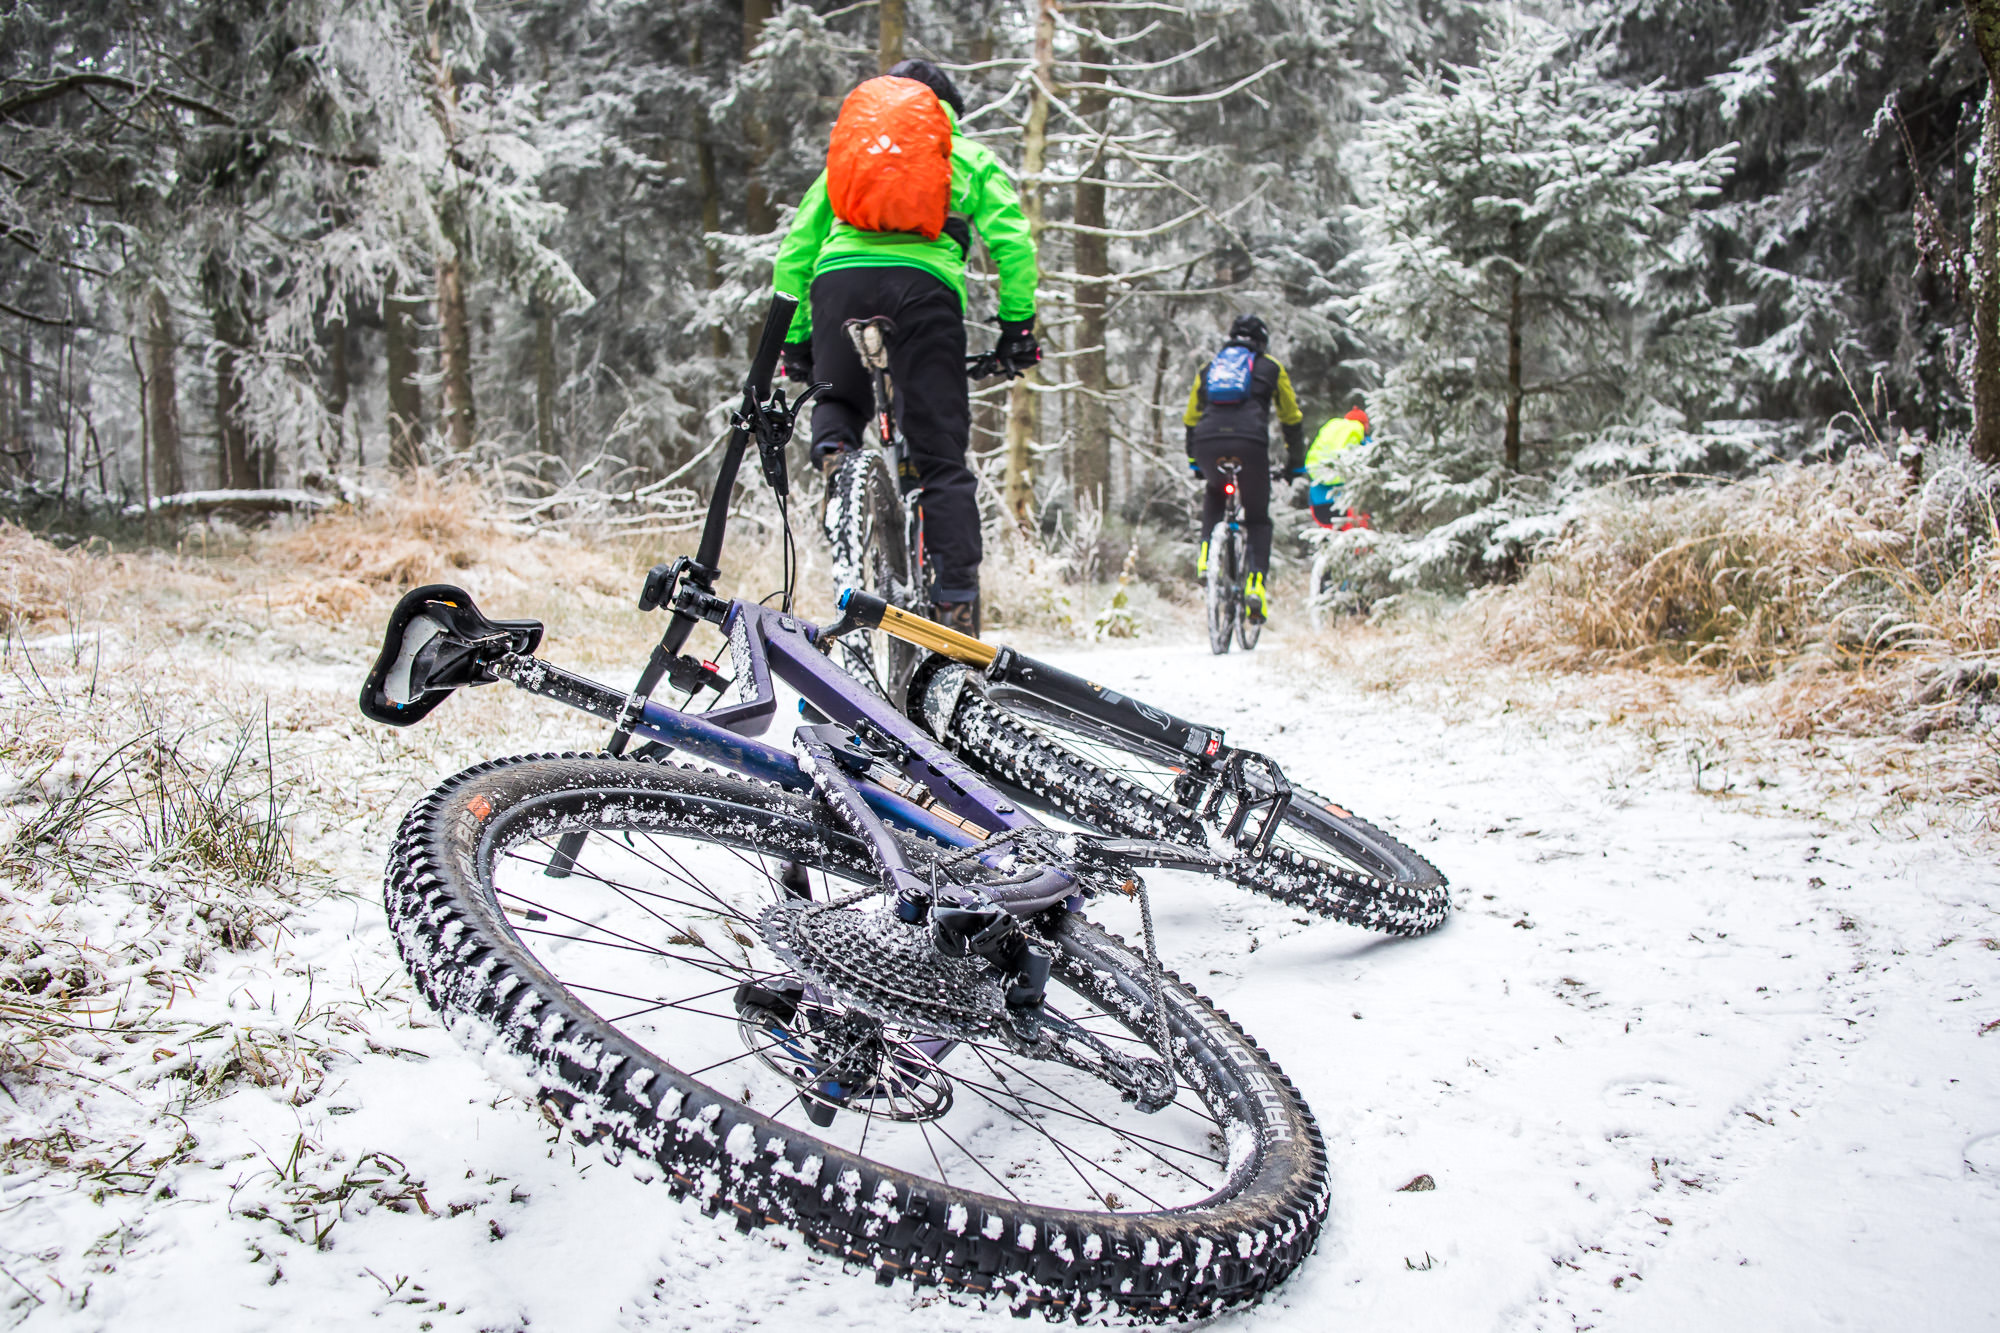 riding MTB with old friends 😃 ❄️ 🚵🏼‍♂️